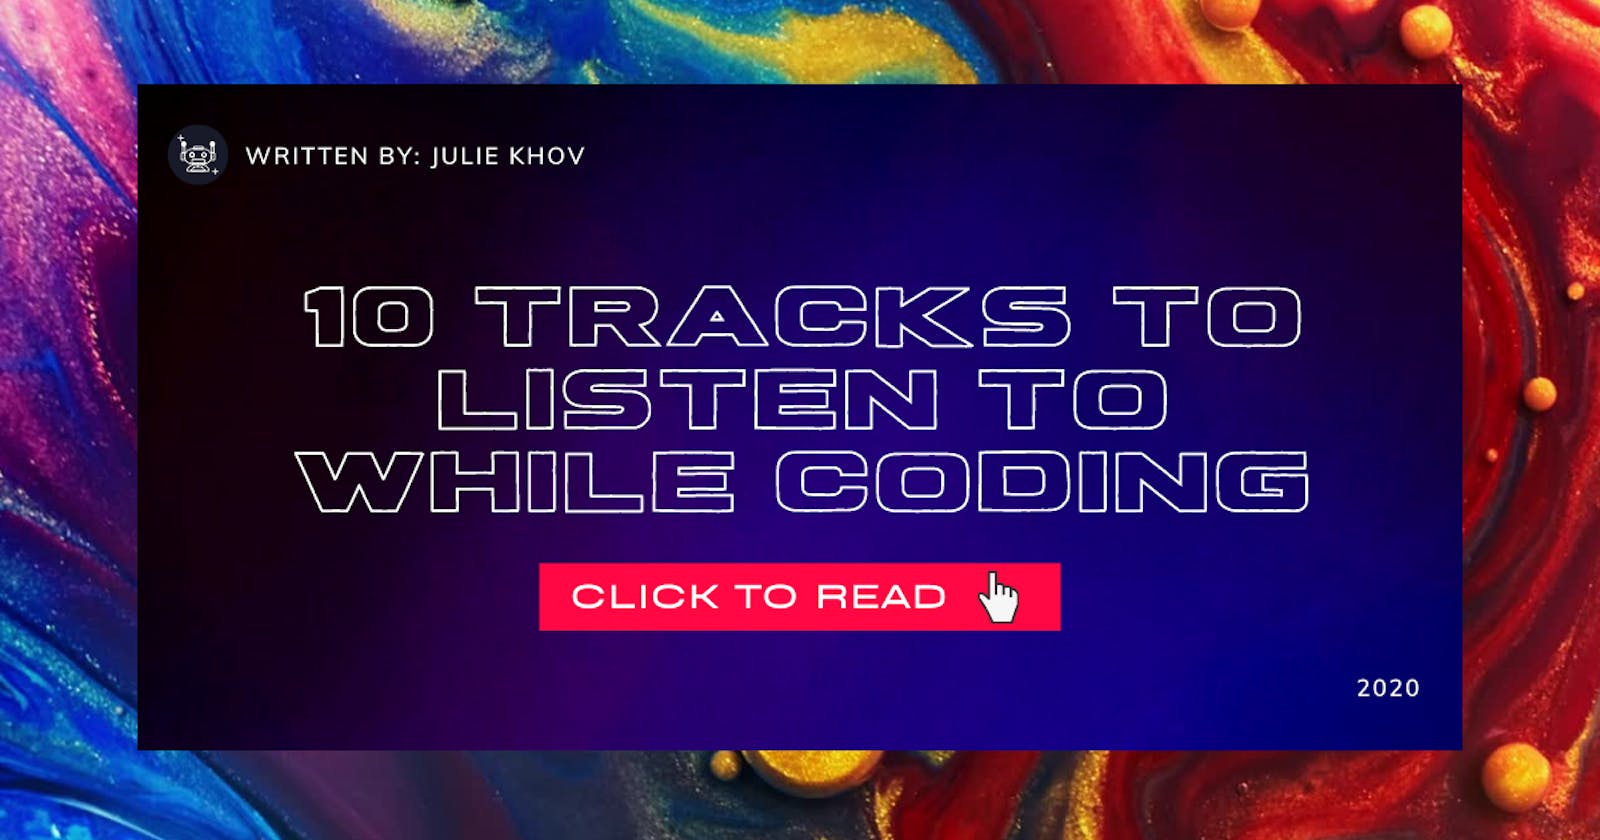 10 Tracks to Listen to While Coding